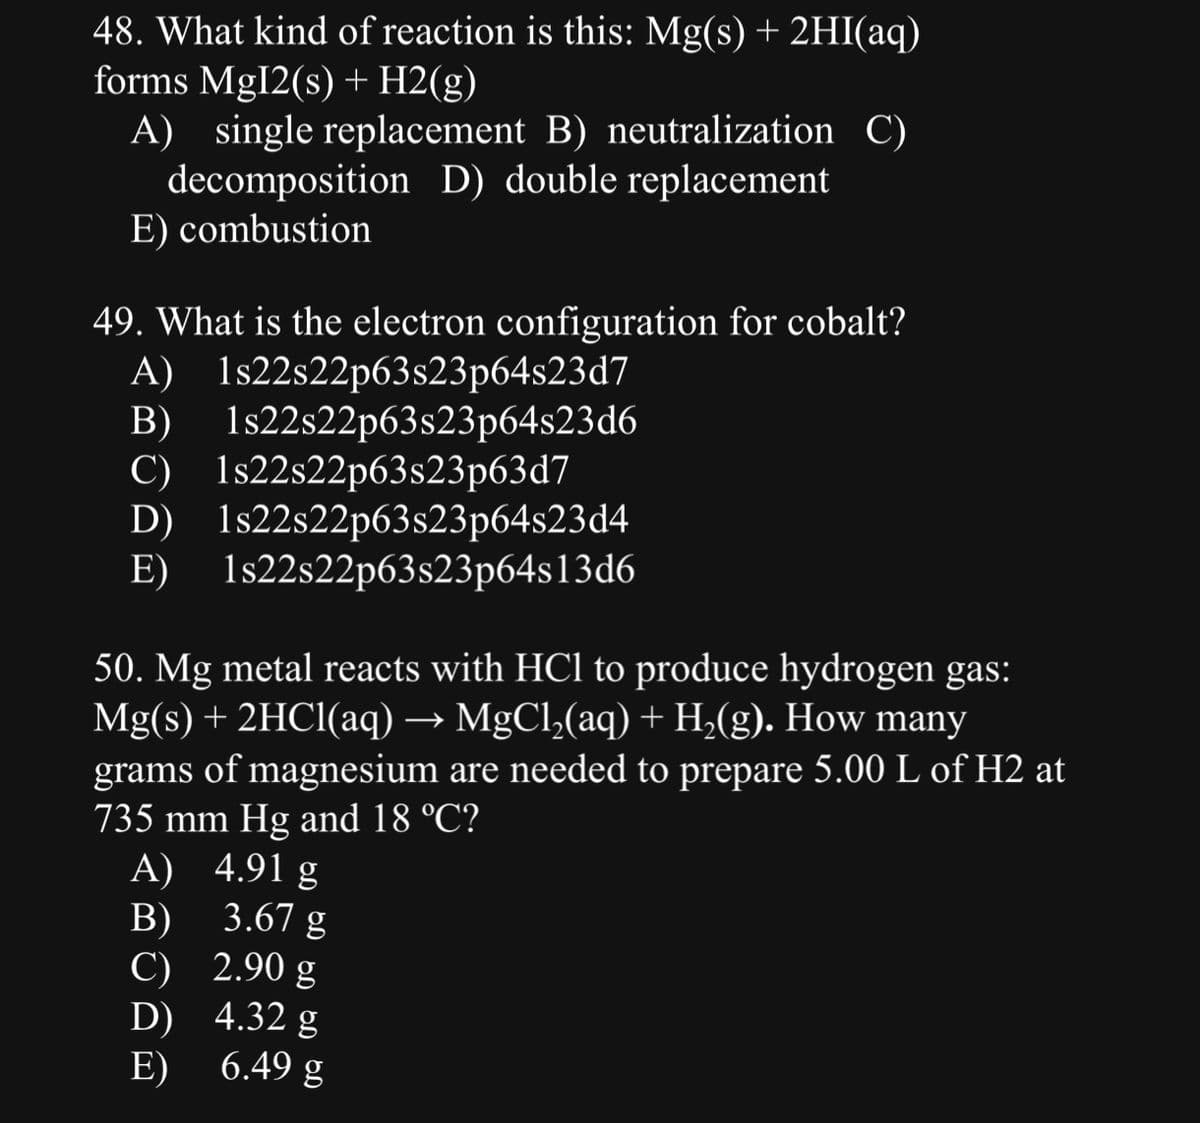 48. What kind of reaction is this: Mg(s) + 2HI(aq)
forms Mg12(s) + H2(g)
A) single replacement B) neutralization C)
decomposition D) double replacement
E) combustion
49. What is the electron configuration for cobalt?
A) 1s22s22p63s23p64s23d7
B) 1s22s22p63s23p64s23d6
C) 1s22s22p63s23p63d7
D)
E)
1s22s22p63s23p64s23d4
1s22s22p63s23p64s13d6
50. Mg metal reacts with HCl to produce hydrogen gas:
Mg(s) + 2HCl(aq) → MgCl₂(aq) + H₂(g). How many
grams of magnesium are needed to prepare 5.00 L of H2 at
735 mm Hg and 18 °C?
A) 4.91 g
B)
3.67 g
2.90 g
4.32 g
6.49 g
C)
D)
E)